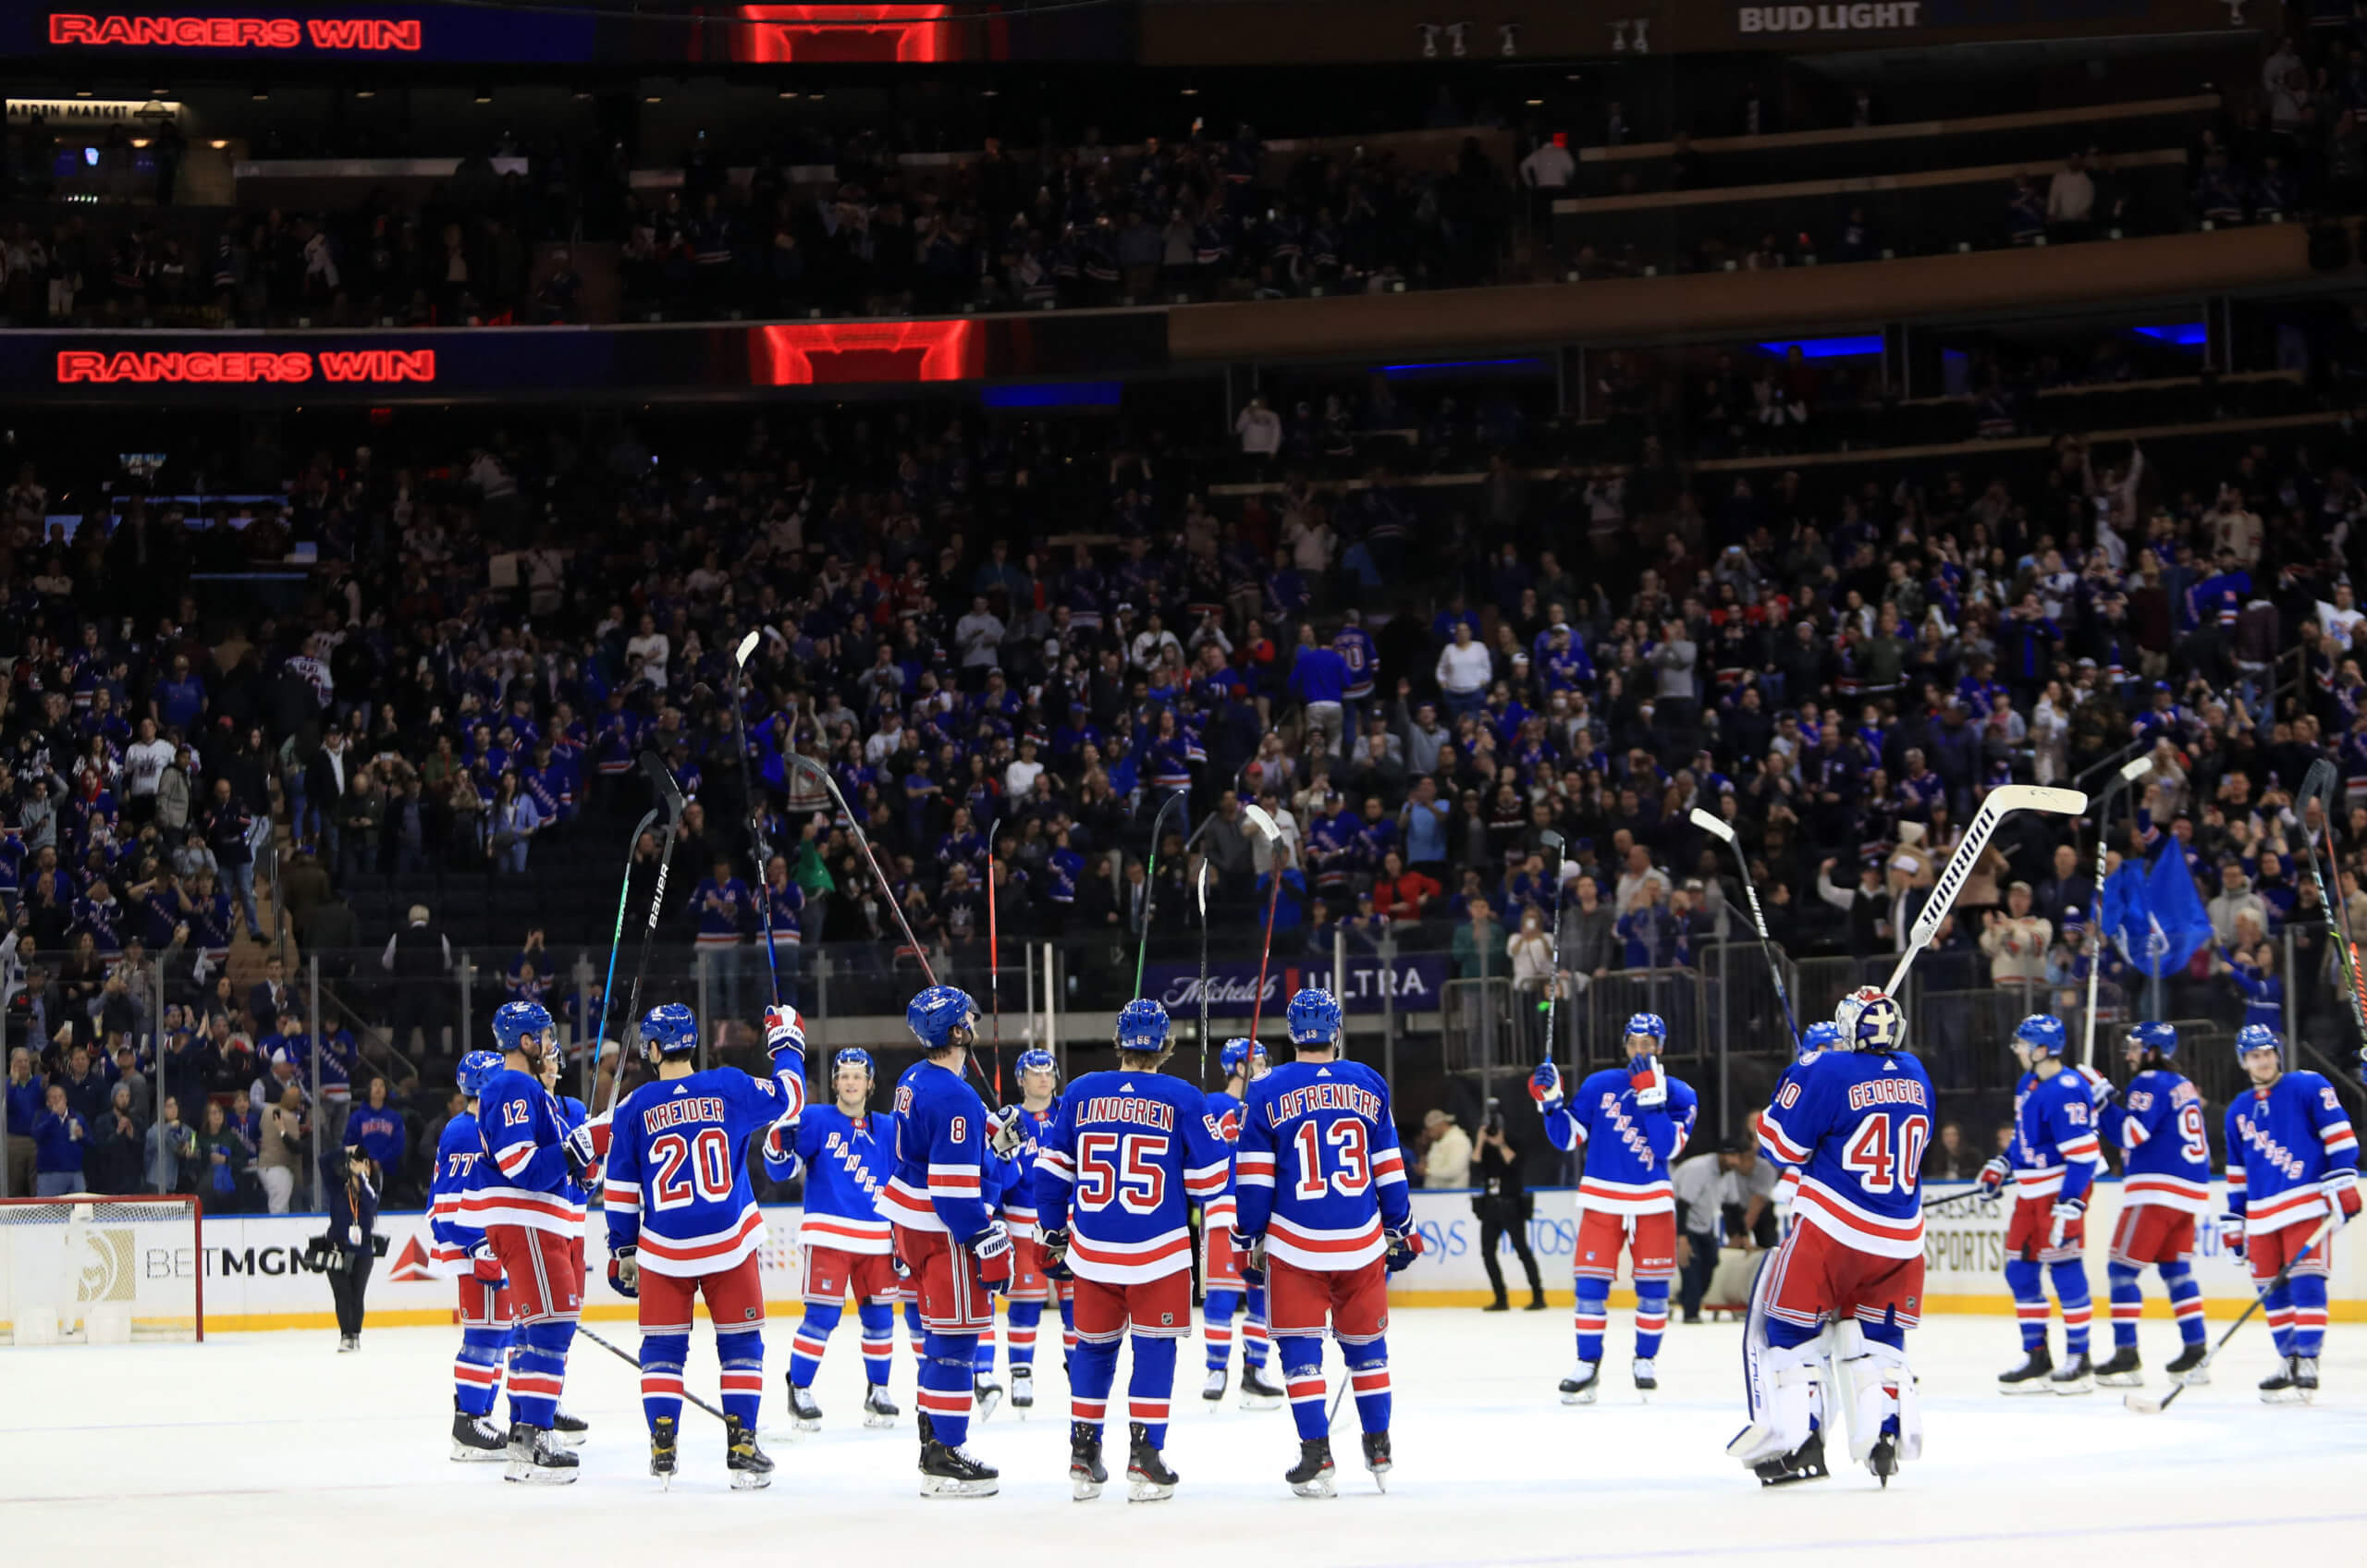 Playoff hockey finally returns to MSG after 5 years with New York